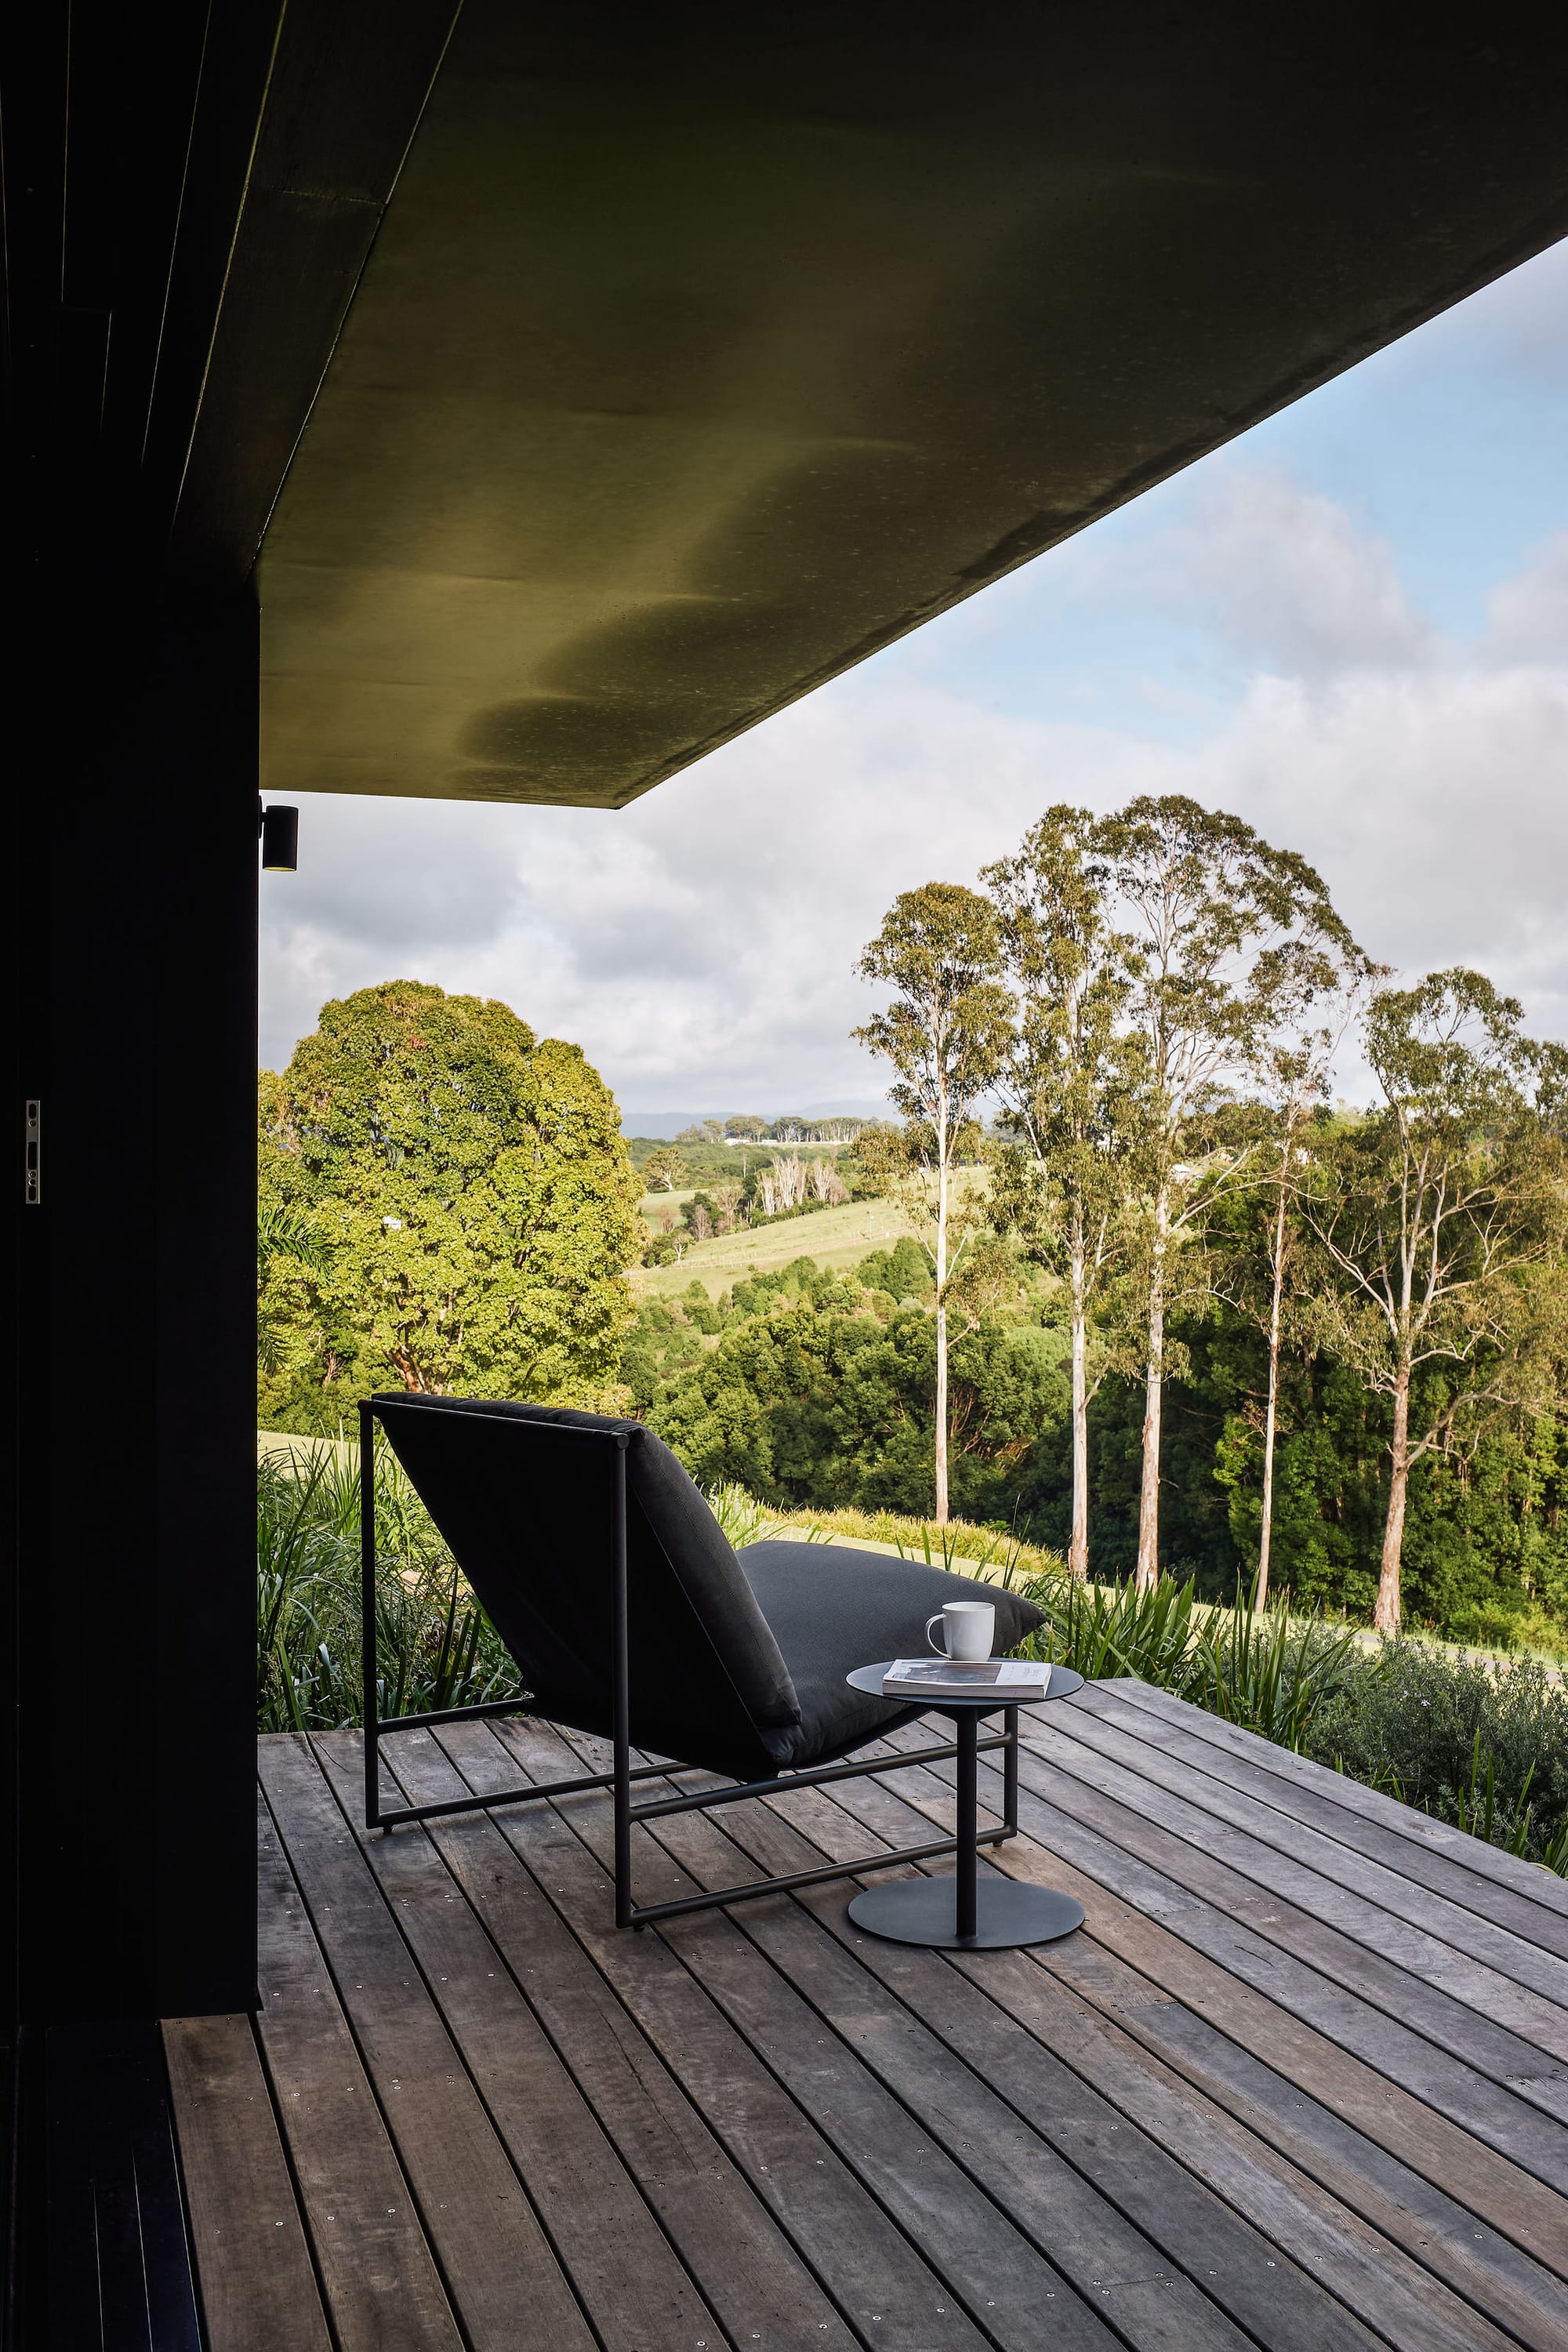 Rockpool Farm Byron Bay. Photography by Andy Macpherson. Outdoor chair sitting on timber deck, overlooking grassy hills and lush bush and trees.